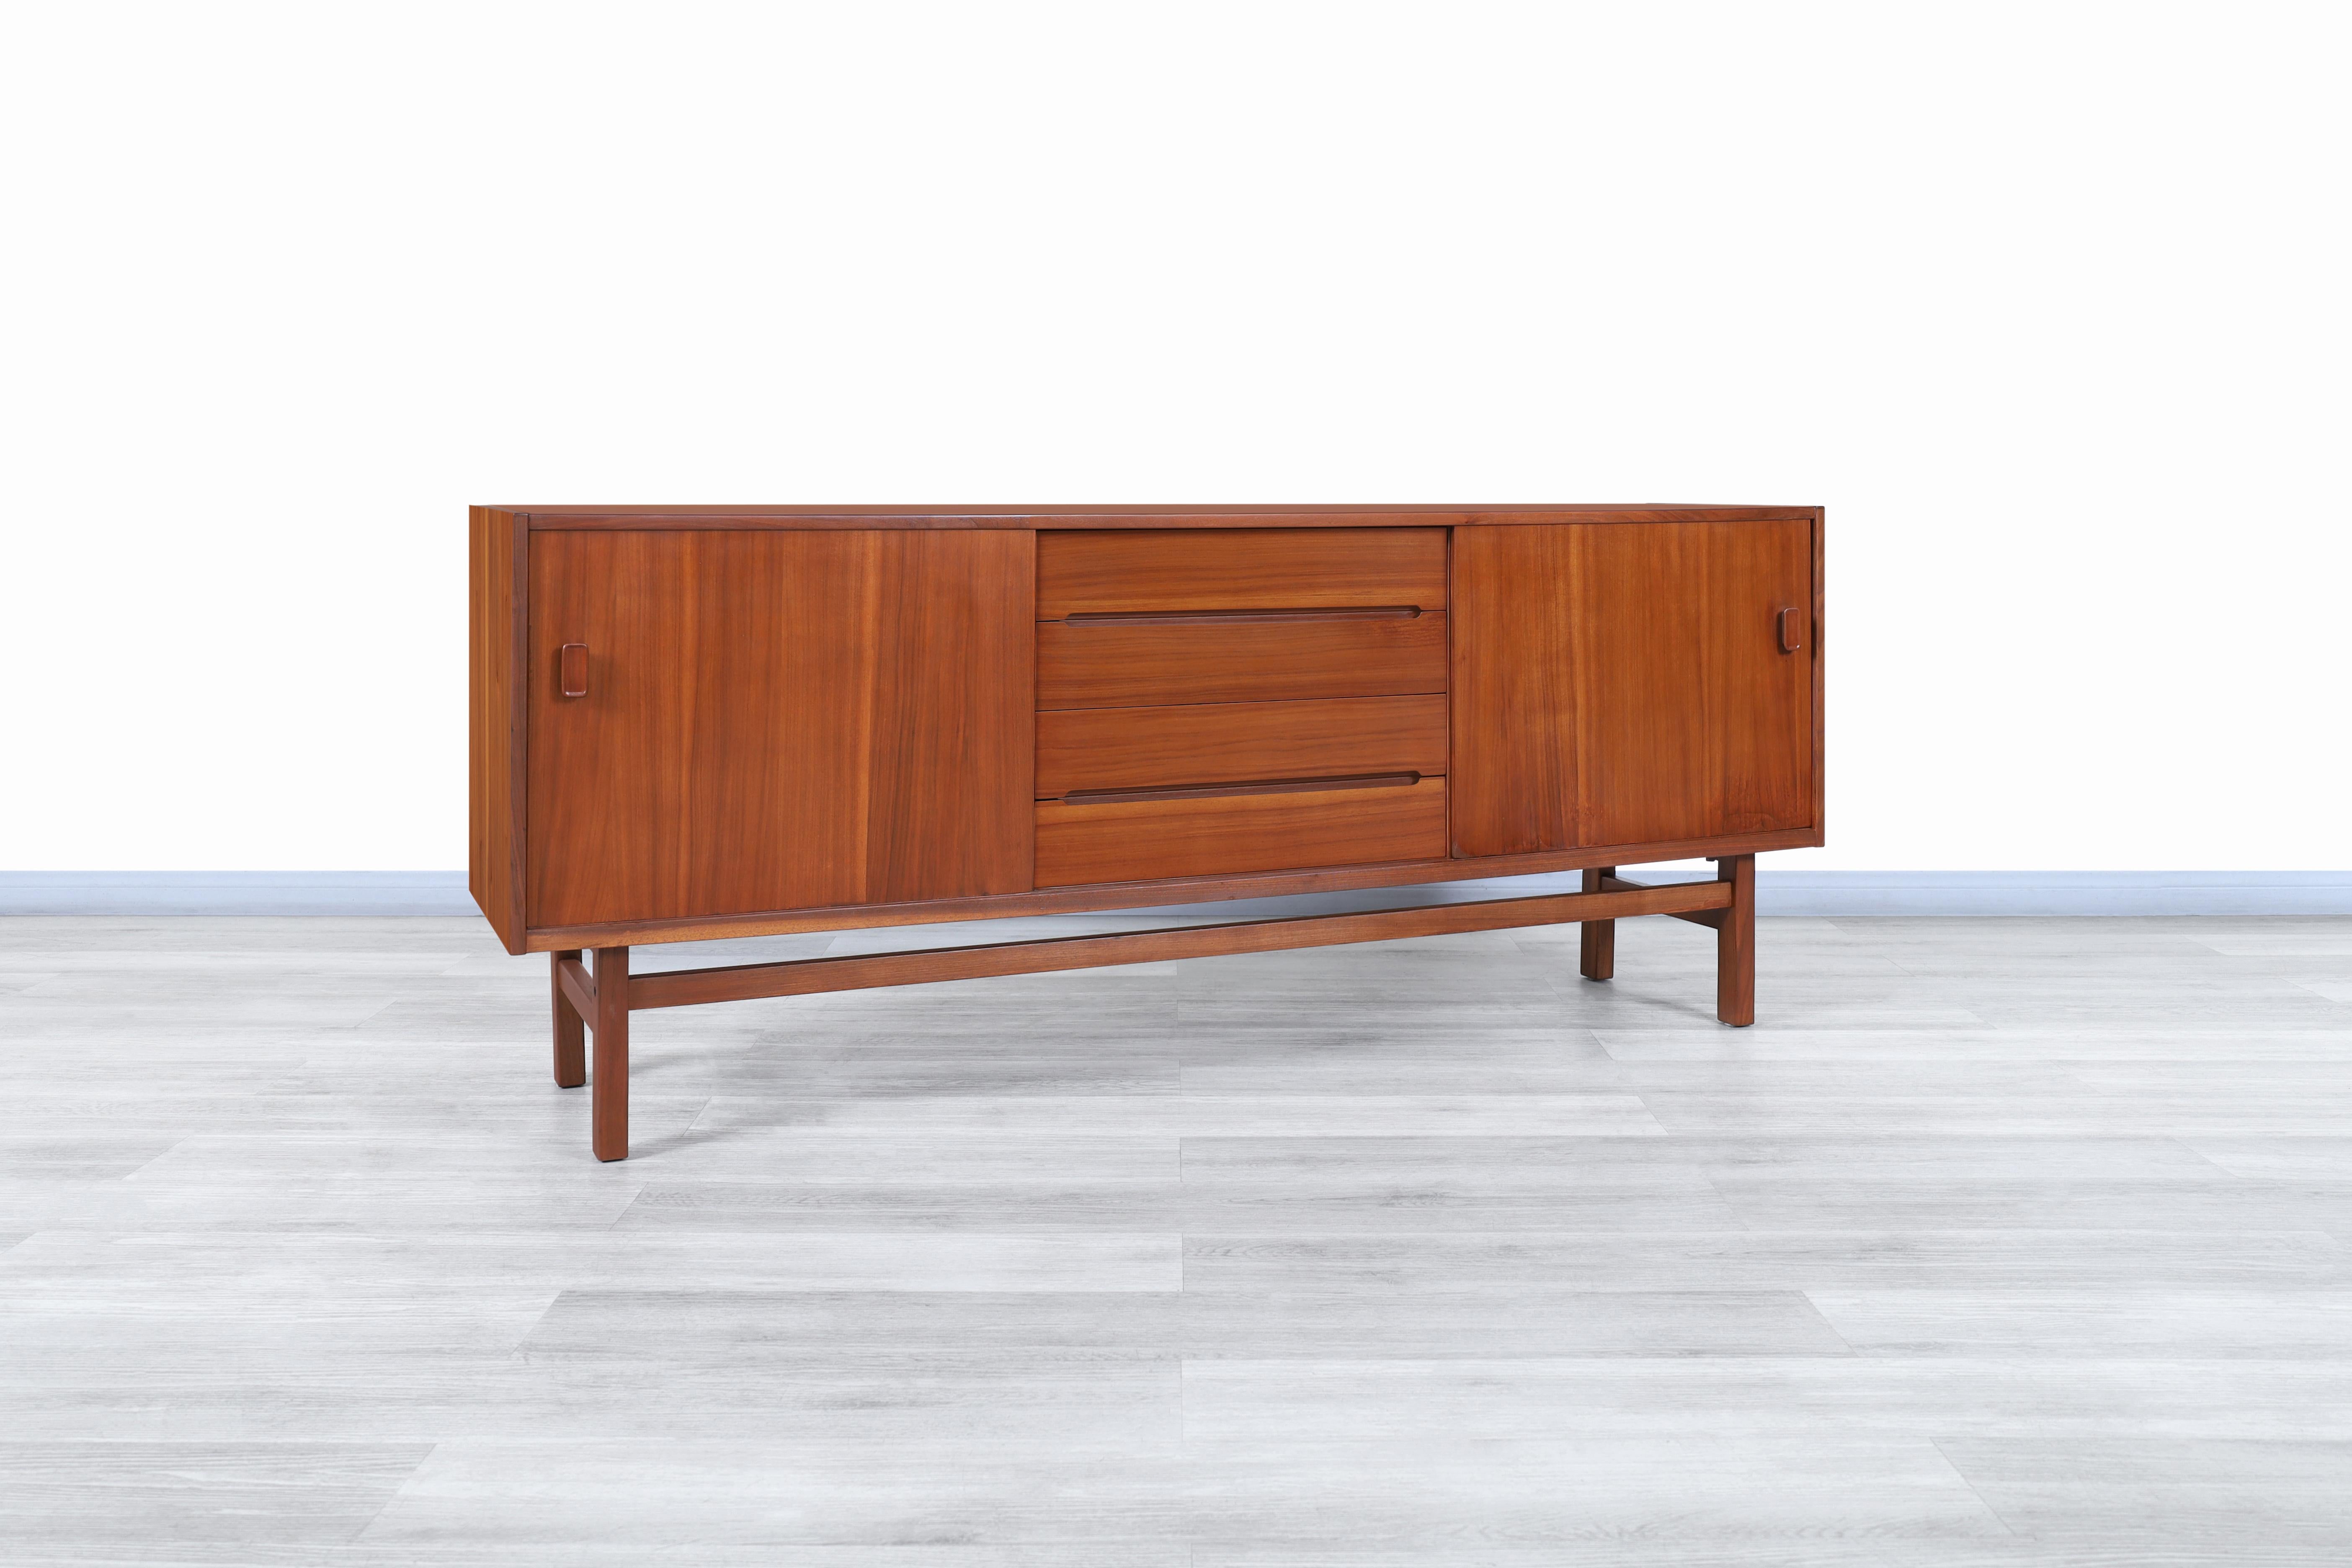 Stunning Swedish “Arild” teak credenza by Nils Jonsson for Troeds in Sweden, circa 1960s. This credenza is truly impressive since it has a minimalist design but is highly functional. It has been built from teak wood, which offers graceful colors and